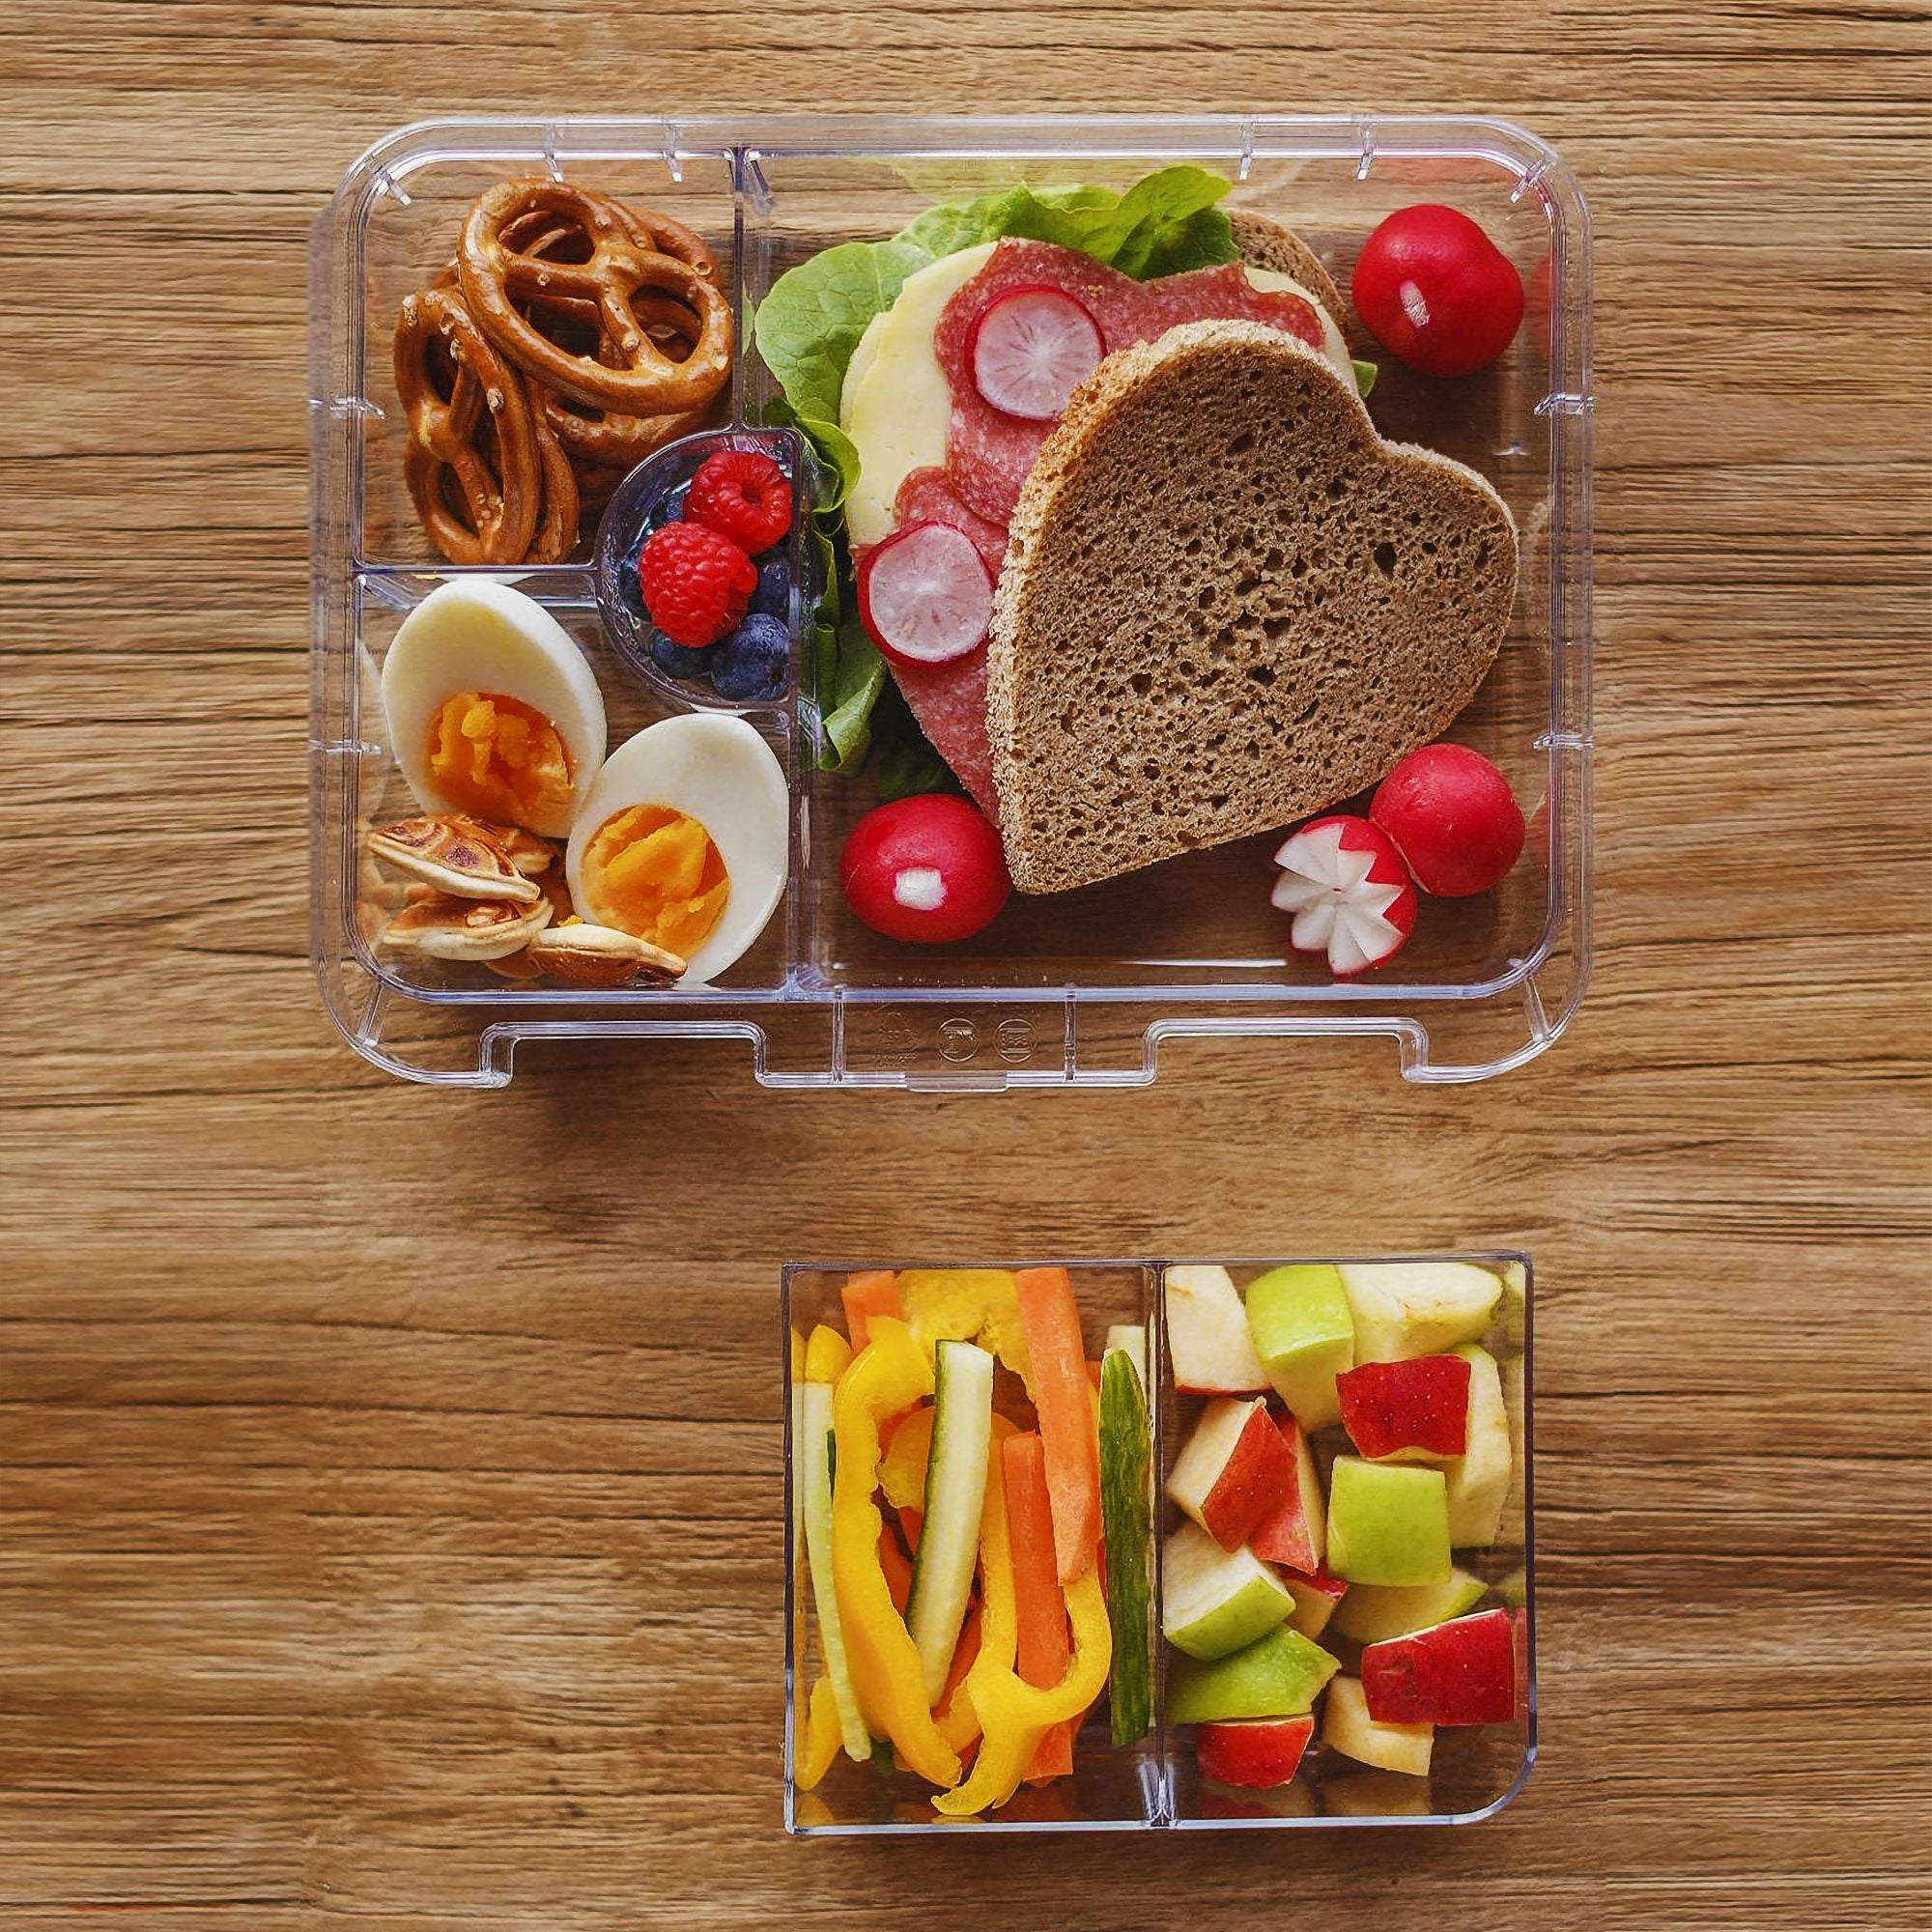 Snack Attack Bento Box or Lunch Box for Kids 4 & 6 Conertible Compartm –